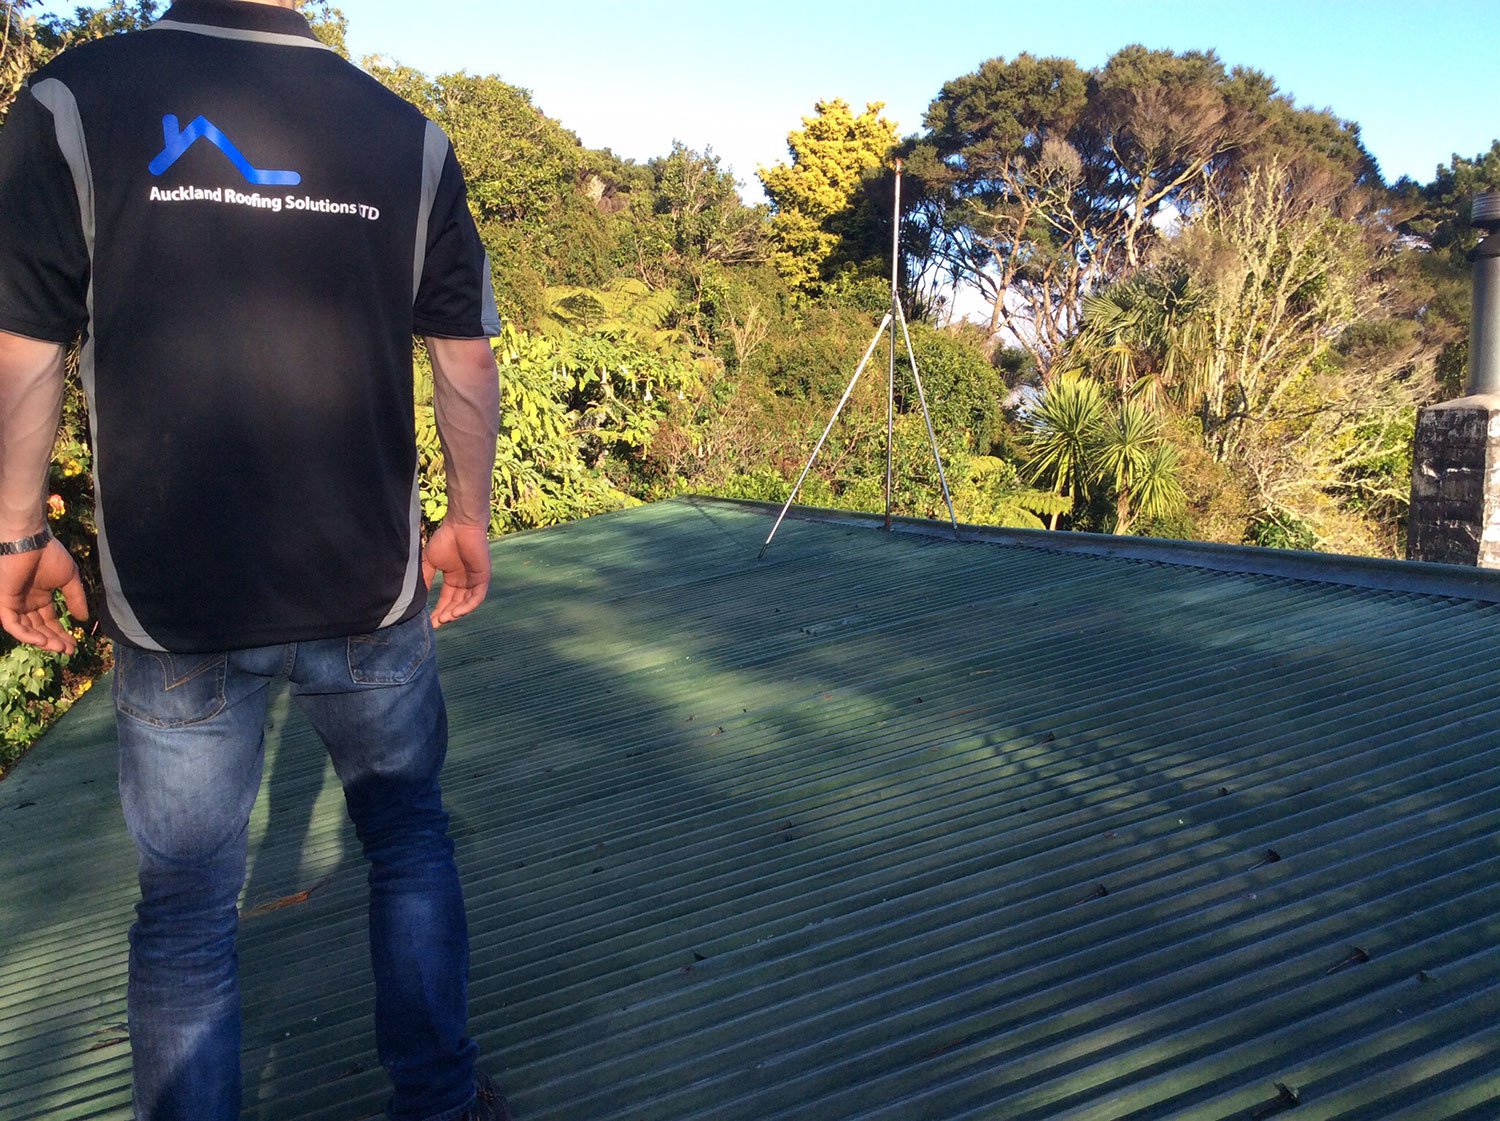 auckland roofing solutions services auckland and new zealand wide new roofs repair cladding and more Project gallery 36